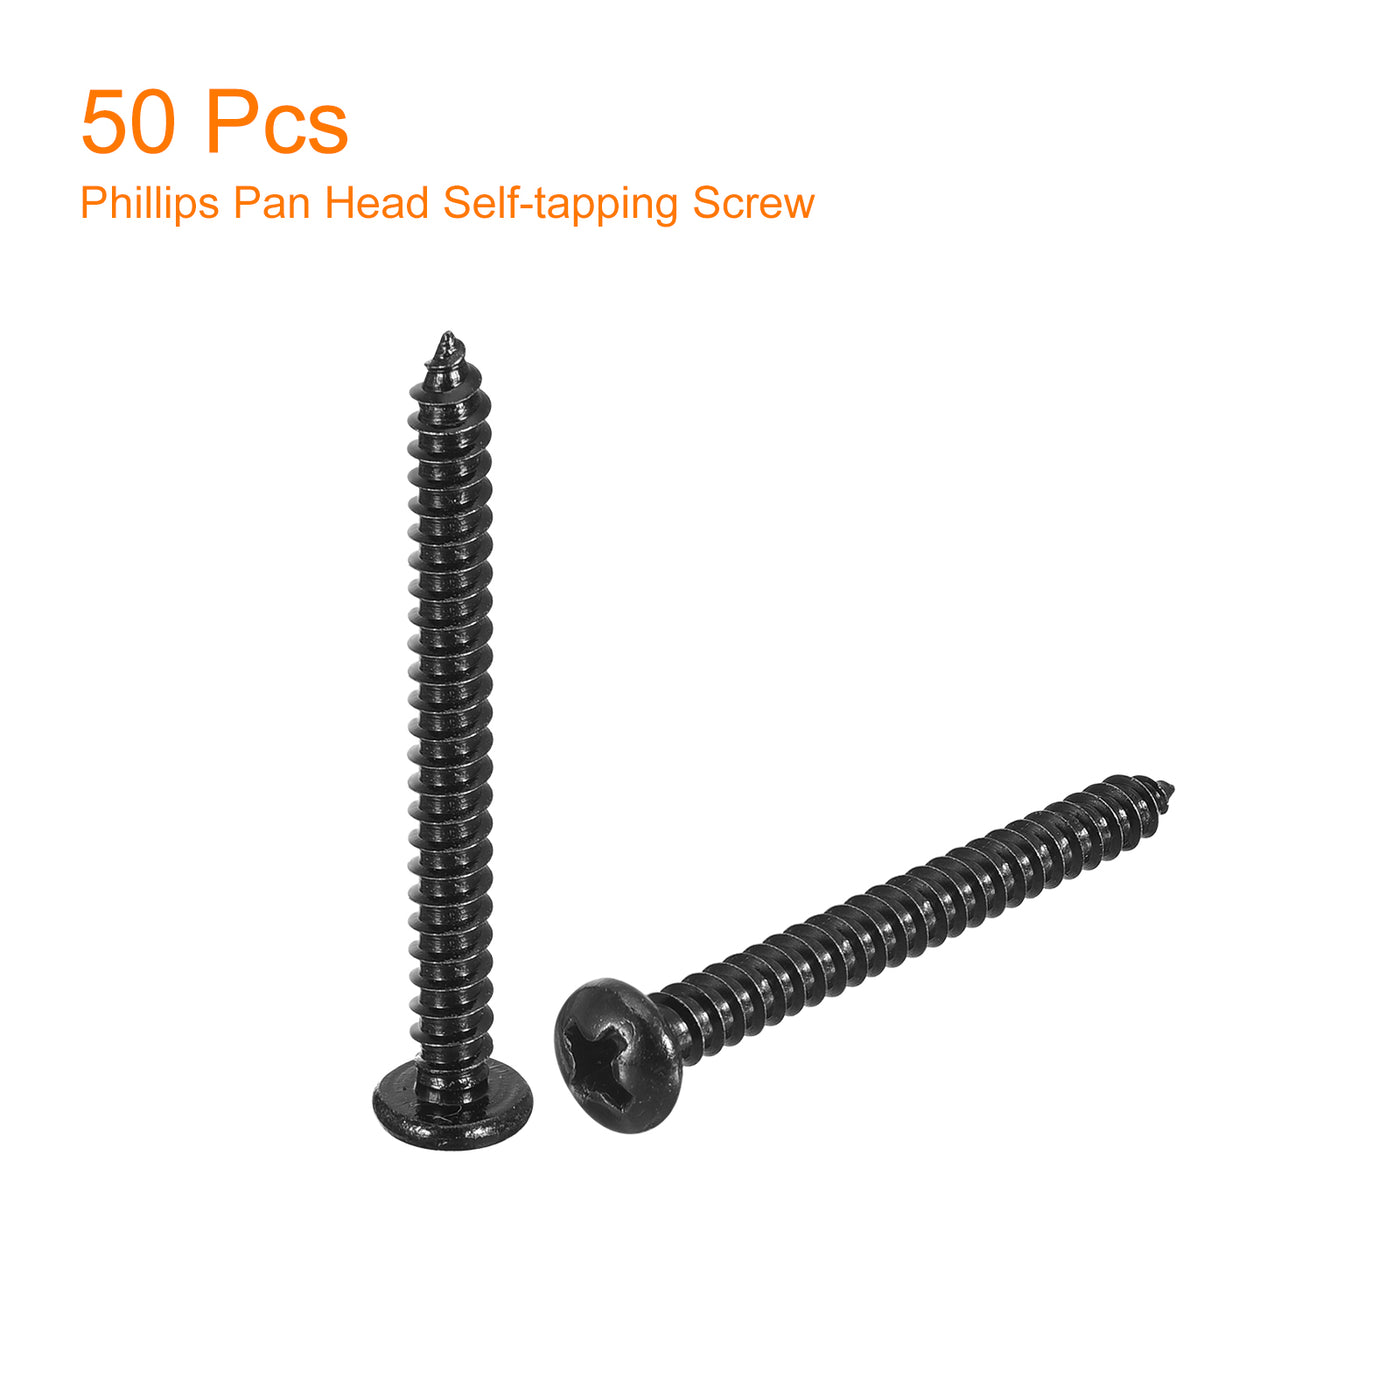 uxcell Uxcell #6 x 1-3/8" Phillips Pan Head Self-tapping Screw, 50pcs - 304 Stainless Steel Round Head Wood Screw Full Thread (Black)